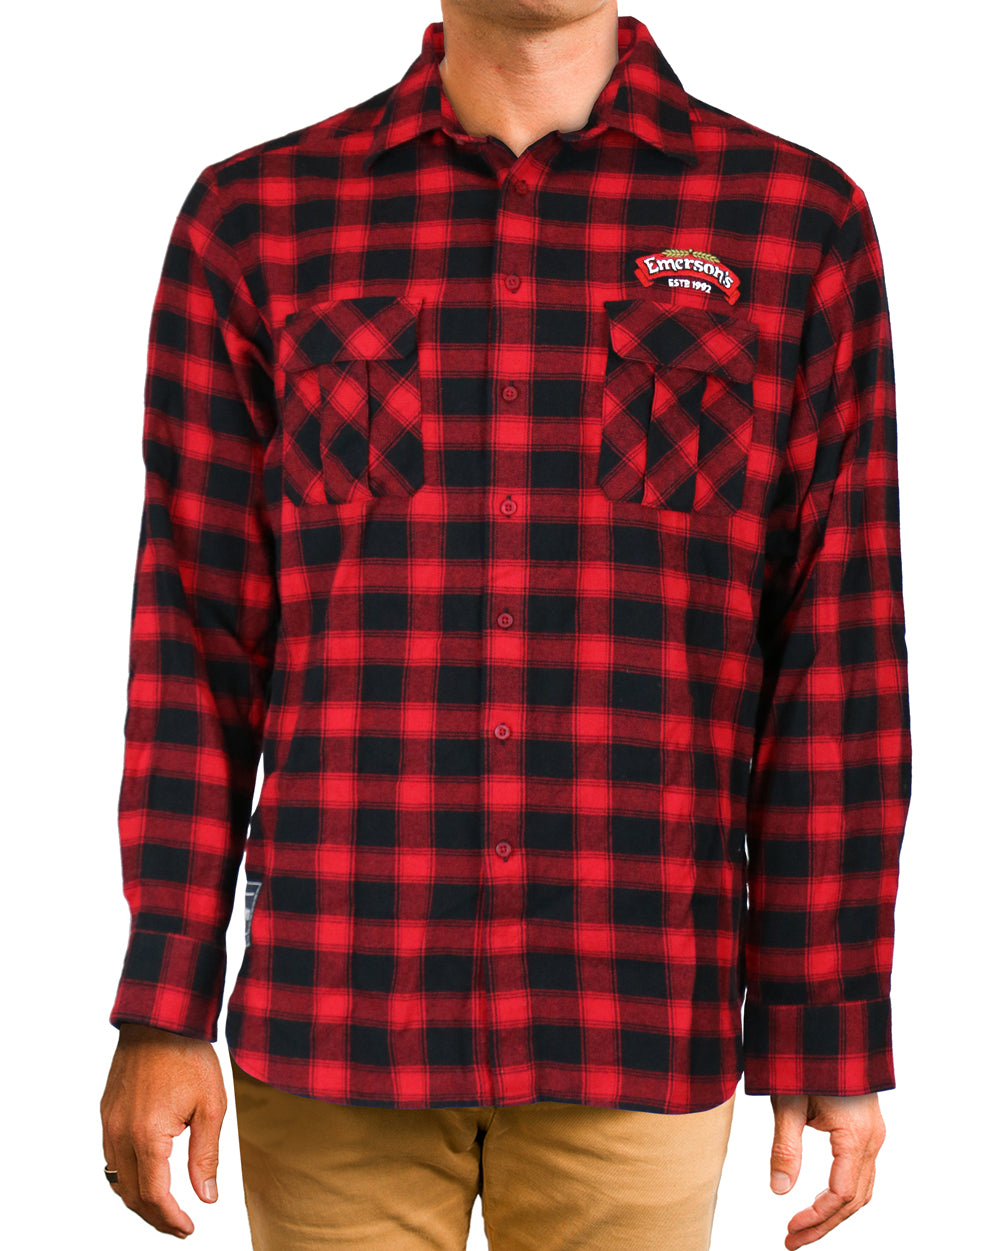 Emerson's Check Shirt -  Beer Gear Apparel & Merchandise - speights - lion red - vb - tokyo dry merch